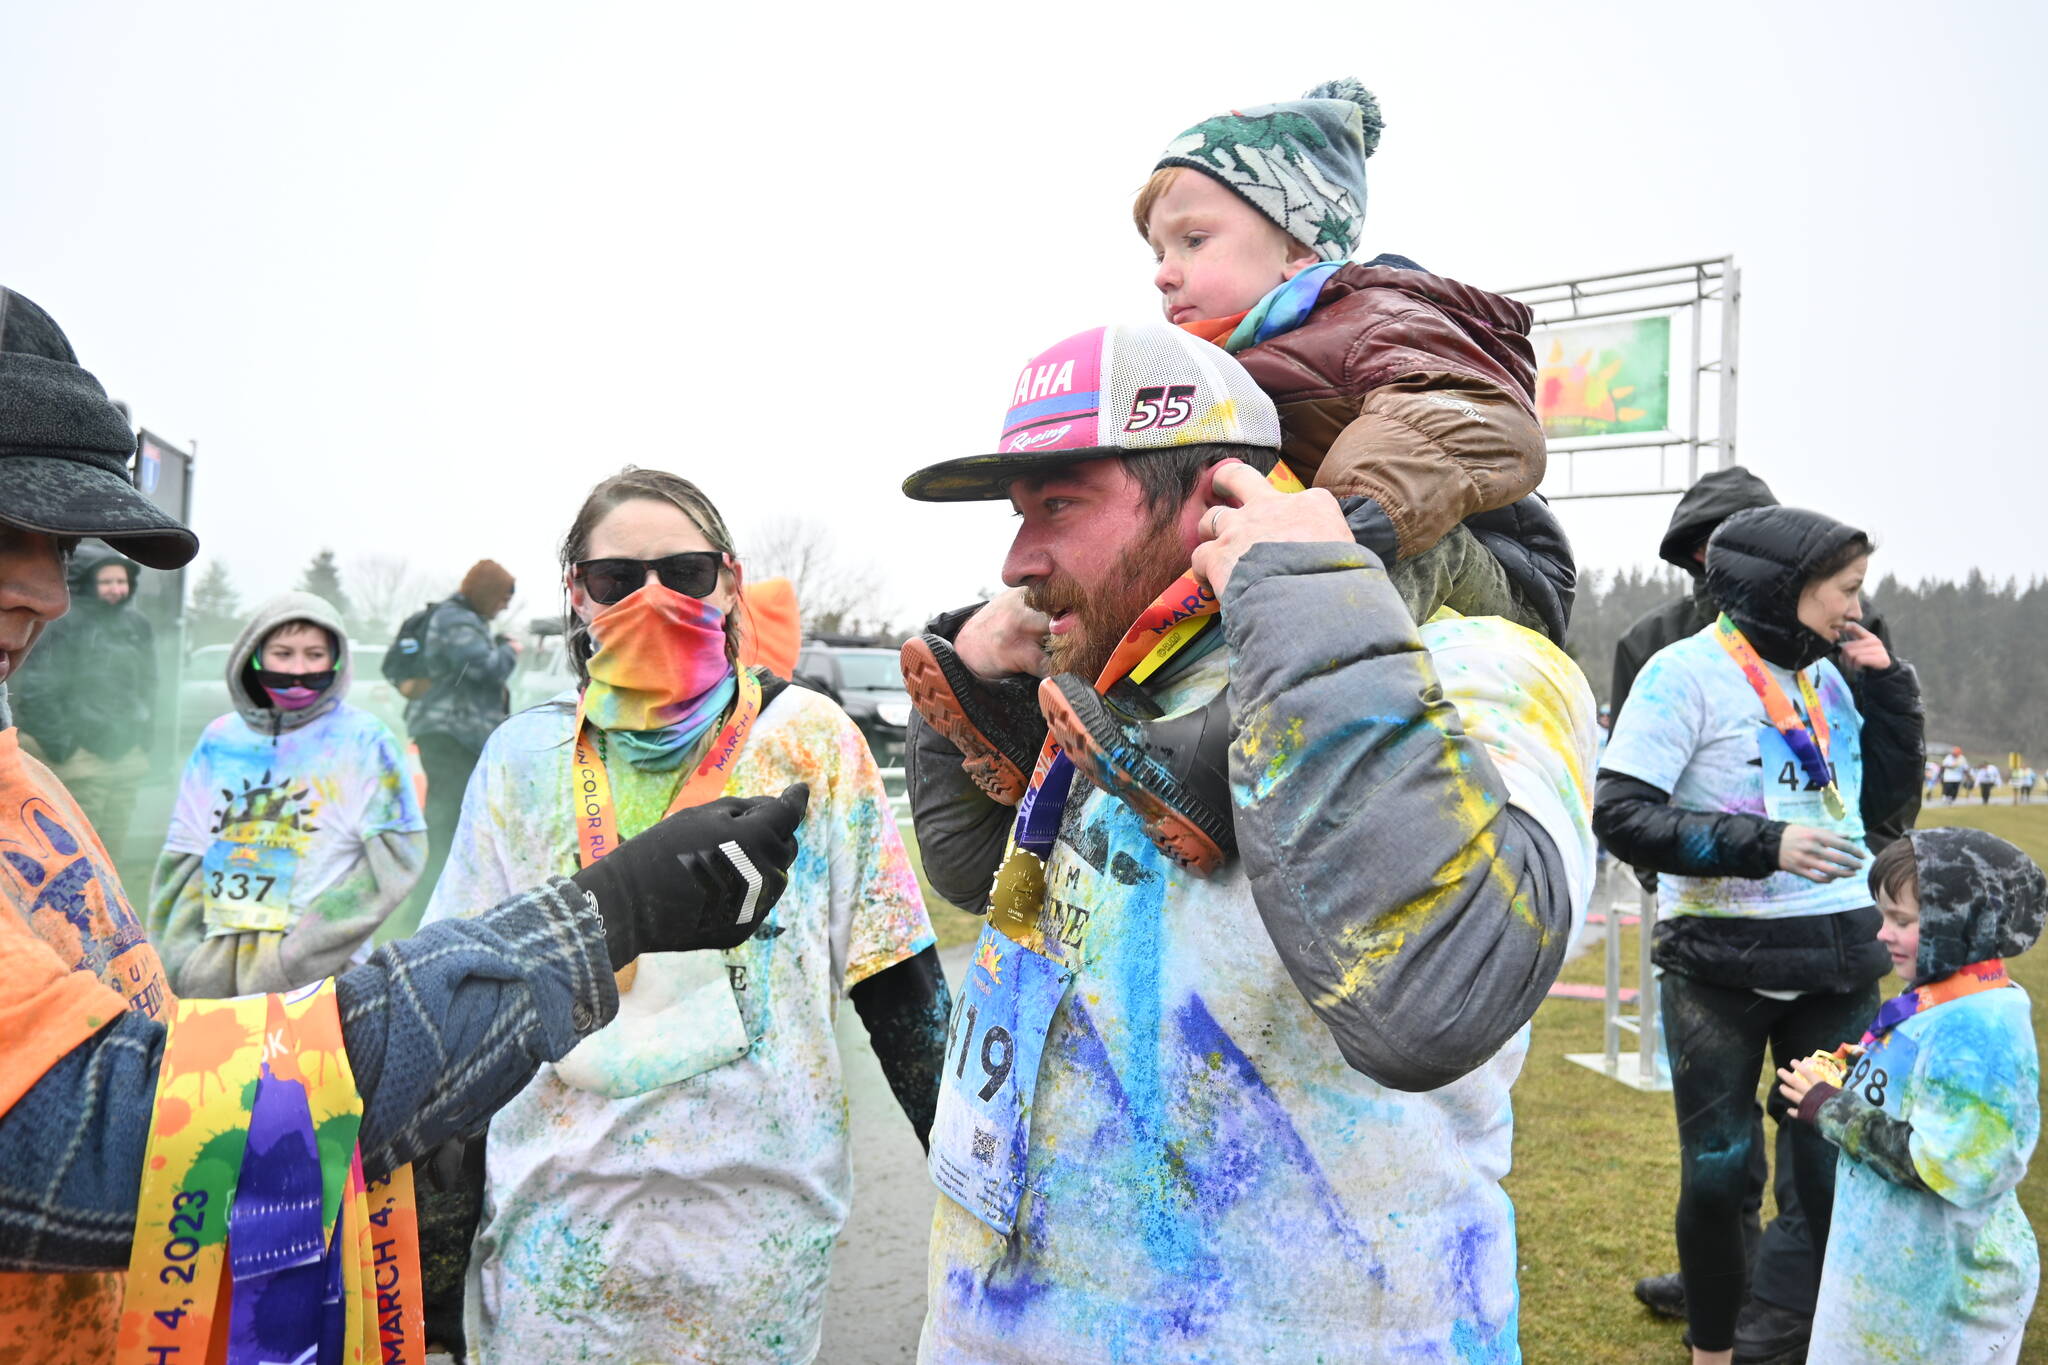 Sequim Gazette photos by Michael Dashiell
Artem Cummings, nearly 3, gets a piggyback ride from dad Dillon Cummings as mom Shelbie looks on, following the Sun Fun Color Run on March 4. The Cummings were part of a large family contingent who braved the chilly weather and rain/sleet/snow for the race.